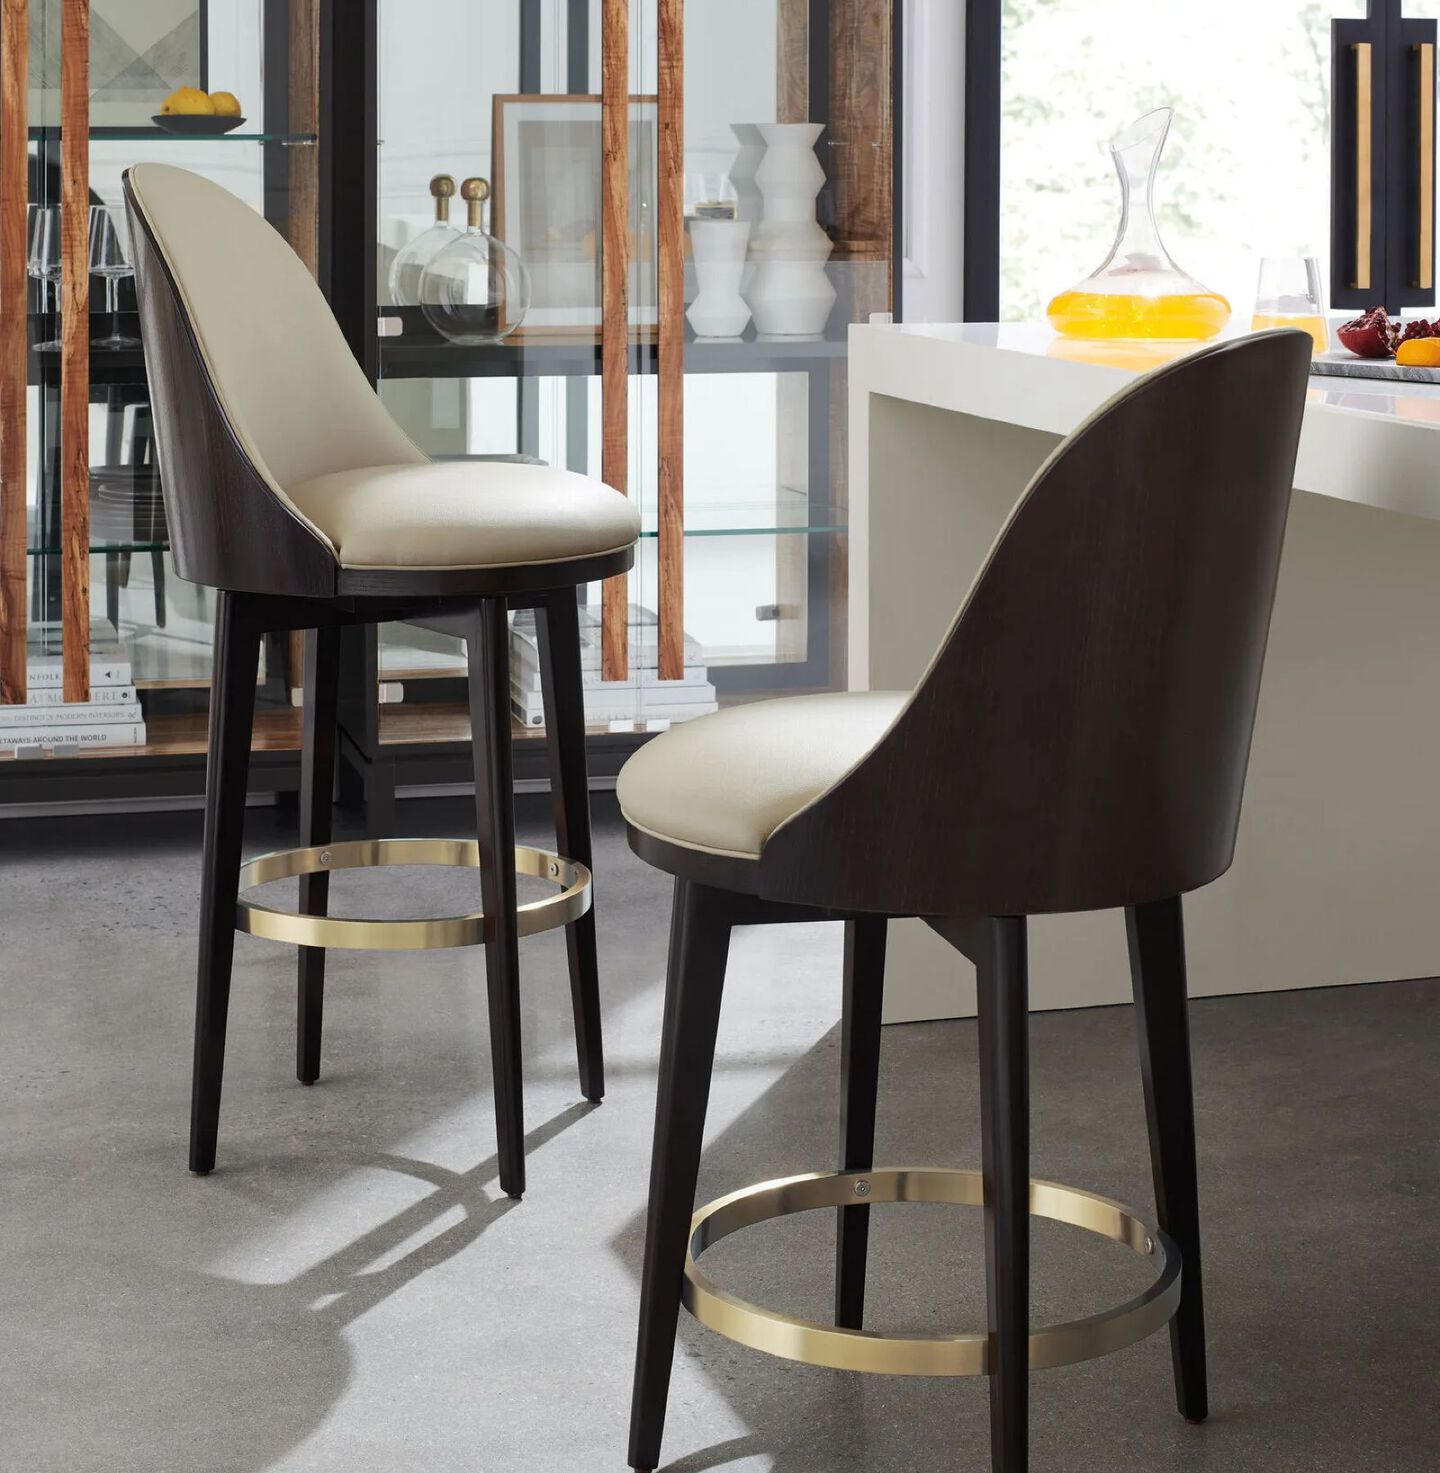 Two barstools with tan leather seats, brown backs, and gold hardware in a kitchen